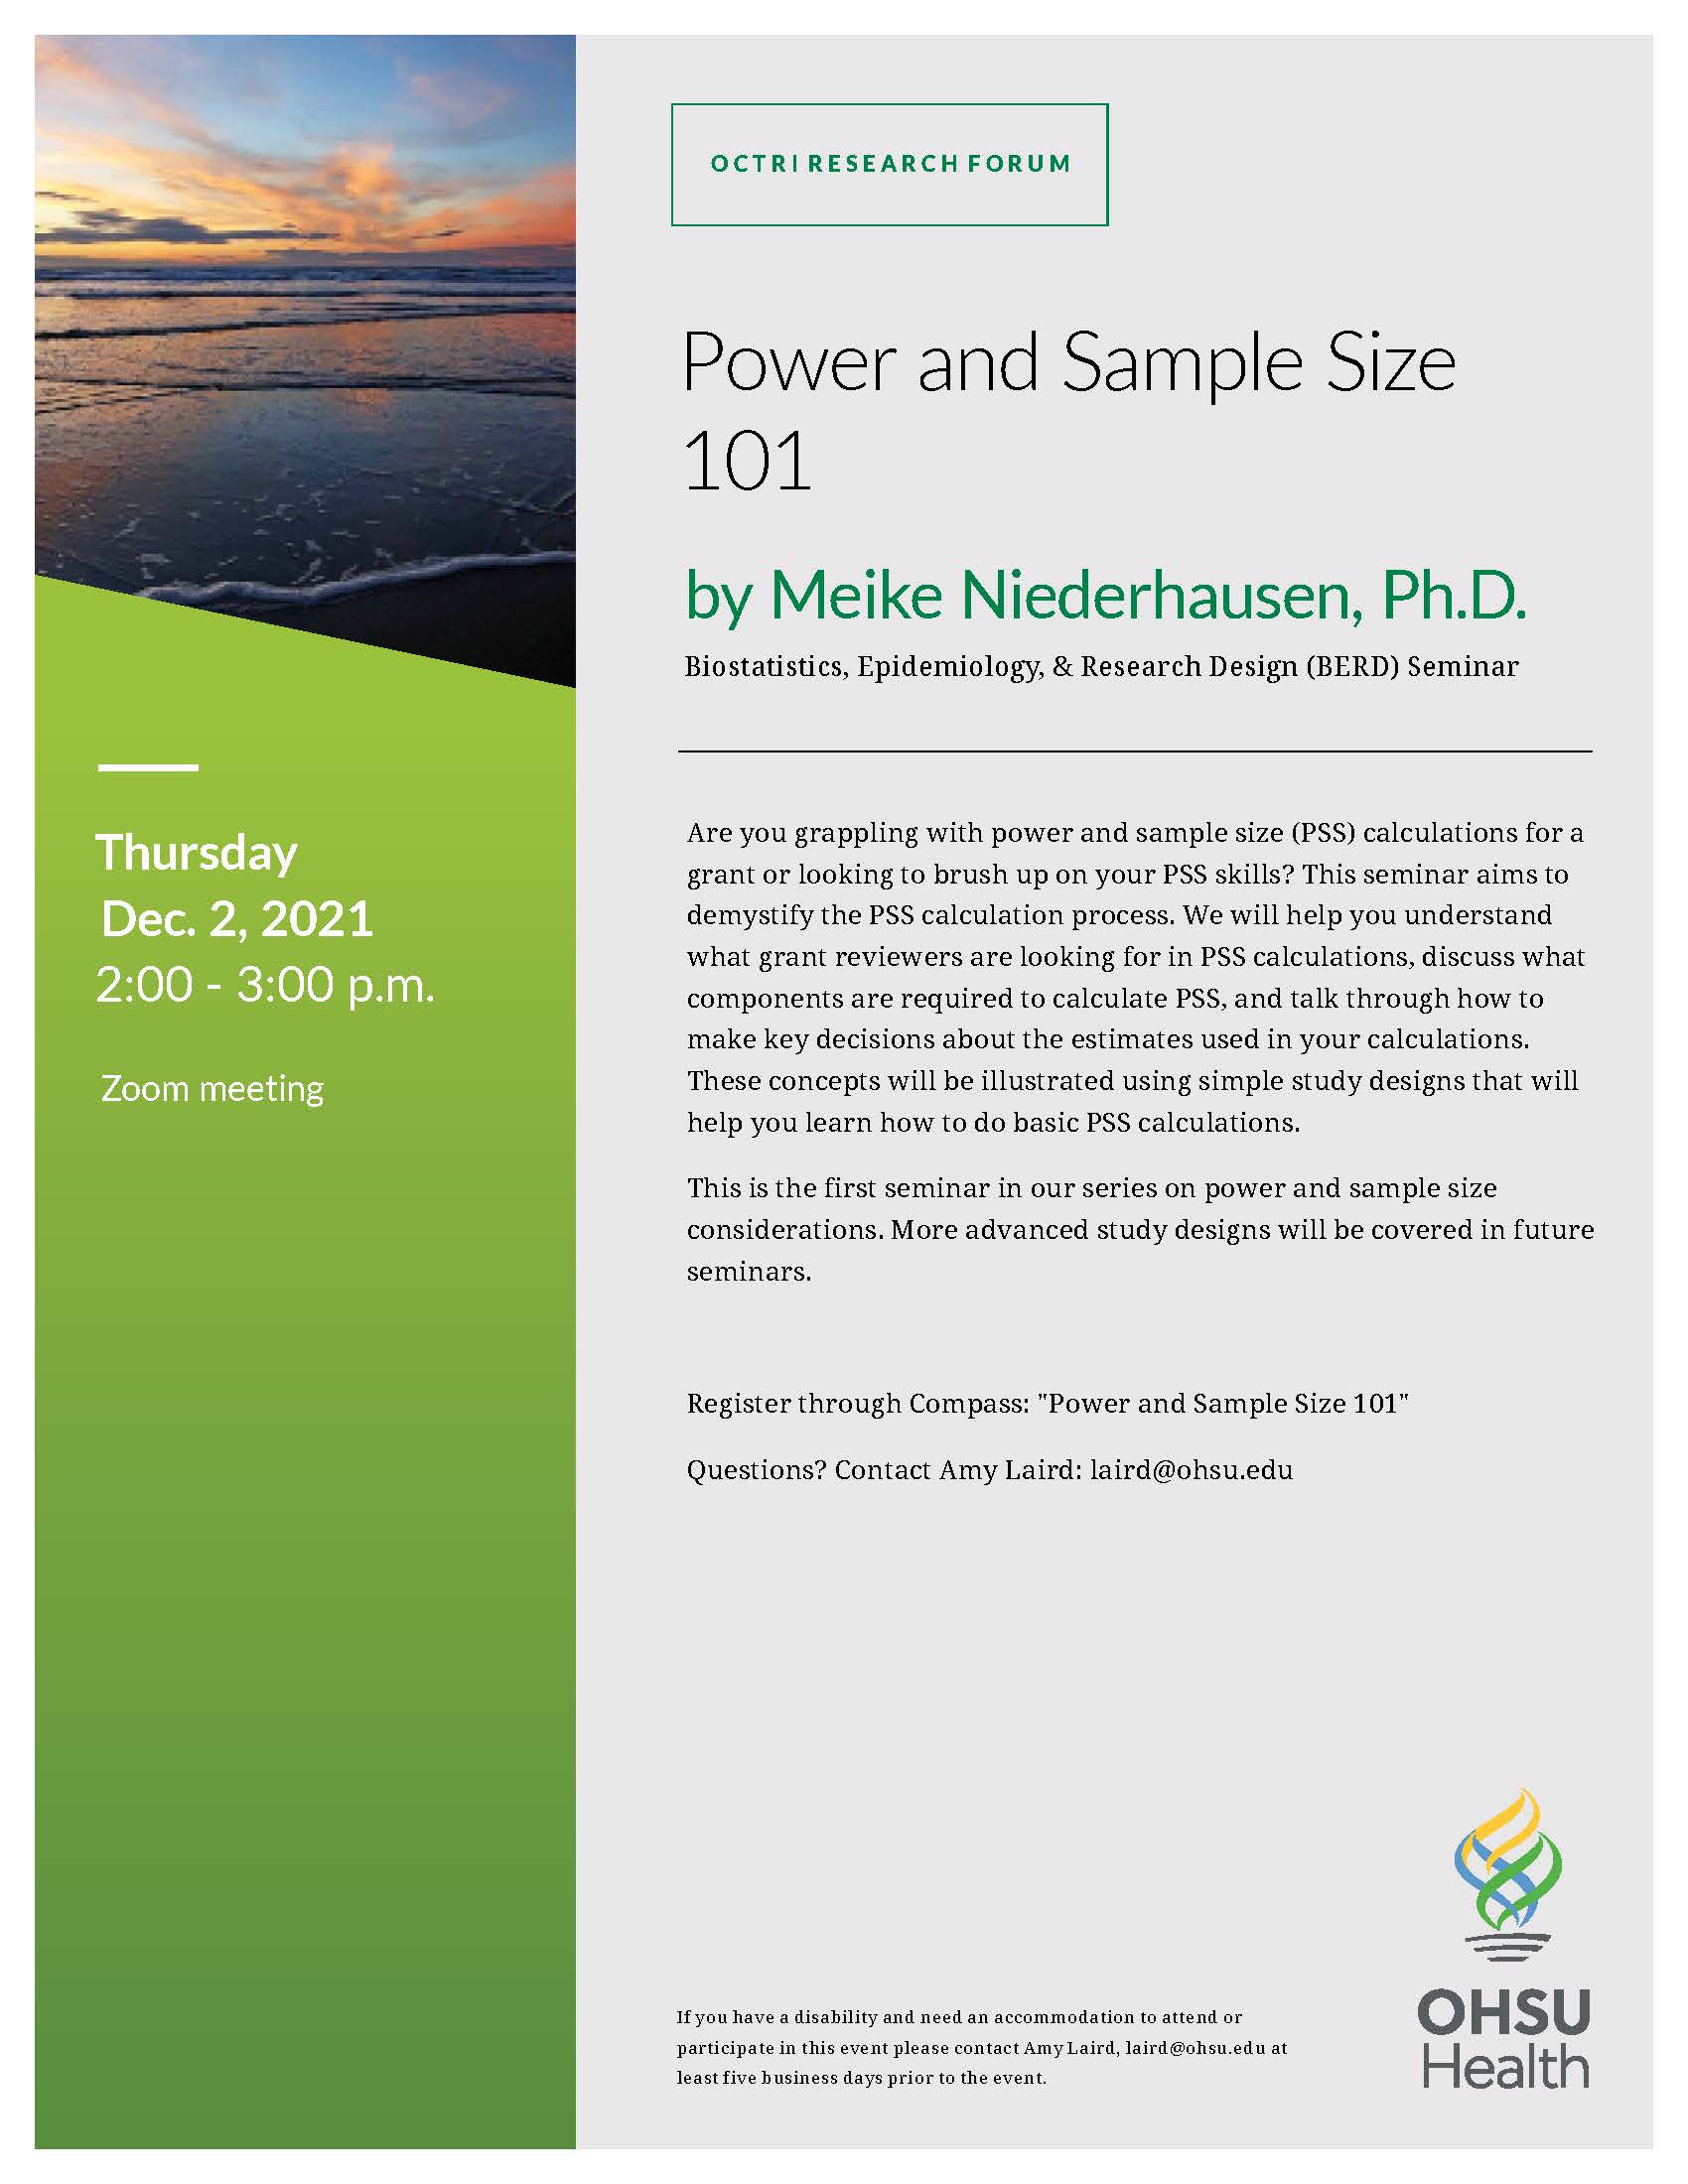 This is a flyer for the Power and Sample Size 101 Biostatistics, Epidemiology, & Research Design (BERD) Seminar on December 2, 2021.